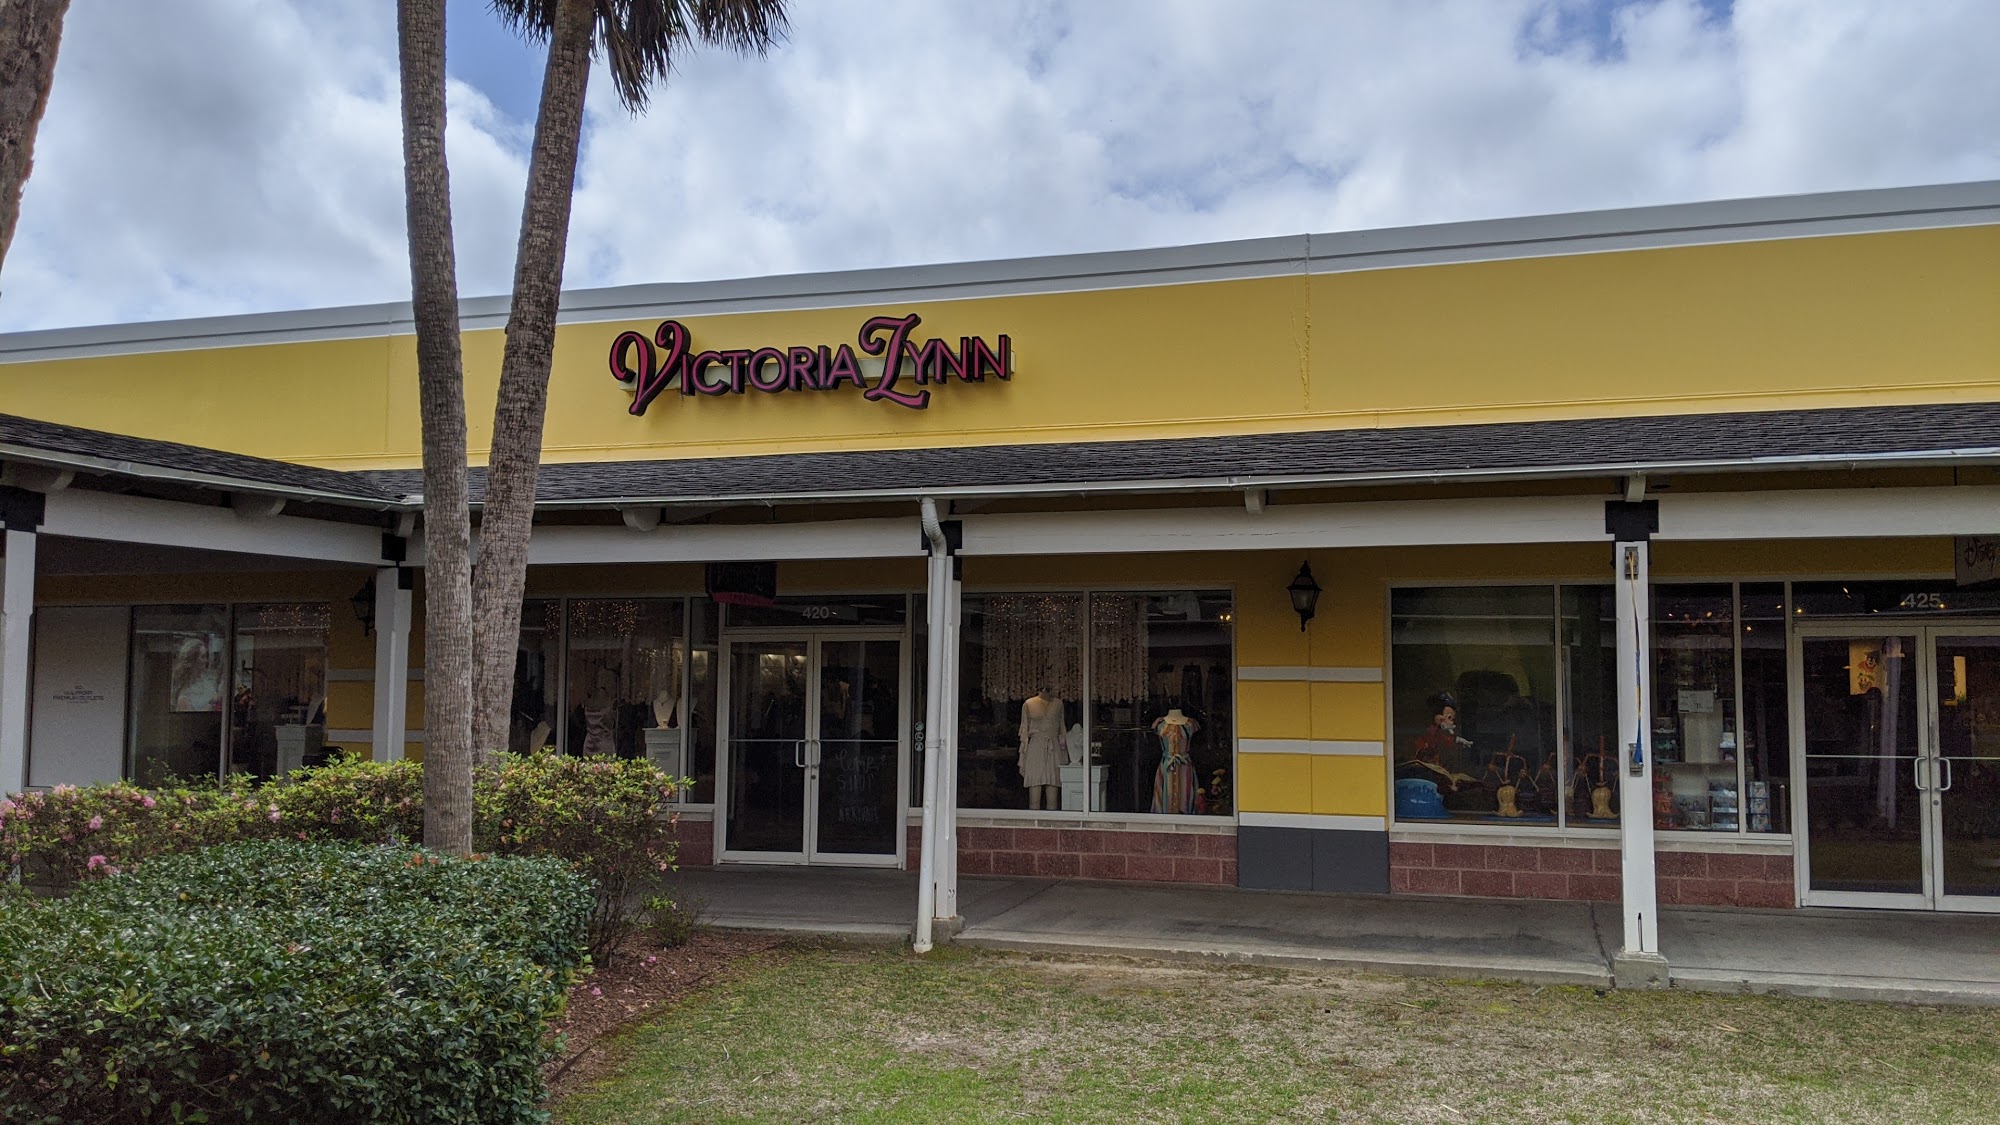 Victoria Lynn Jewelry Premium Outlet Store